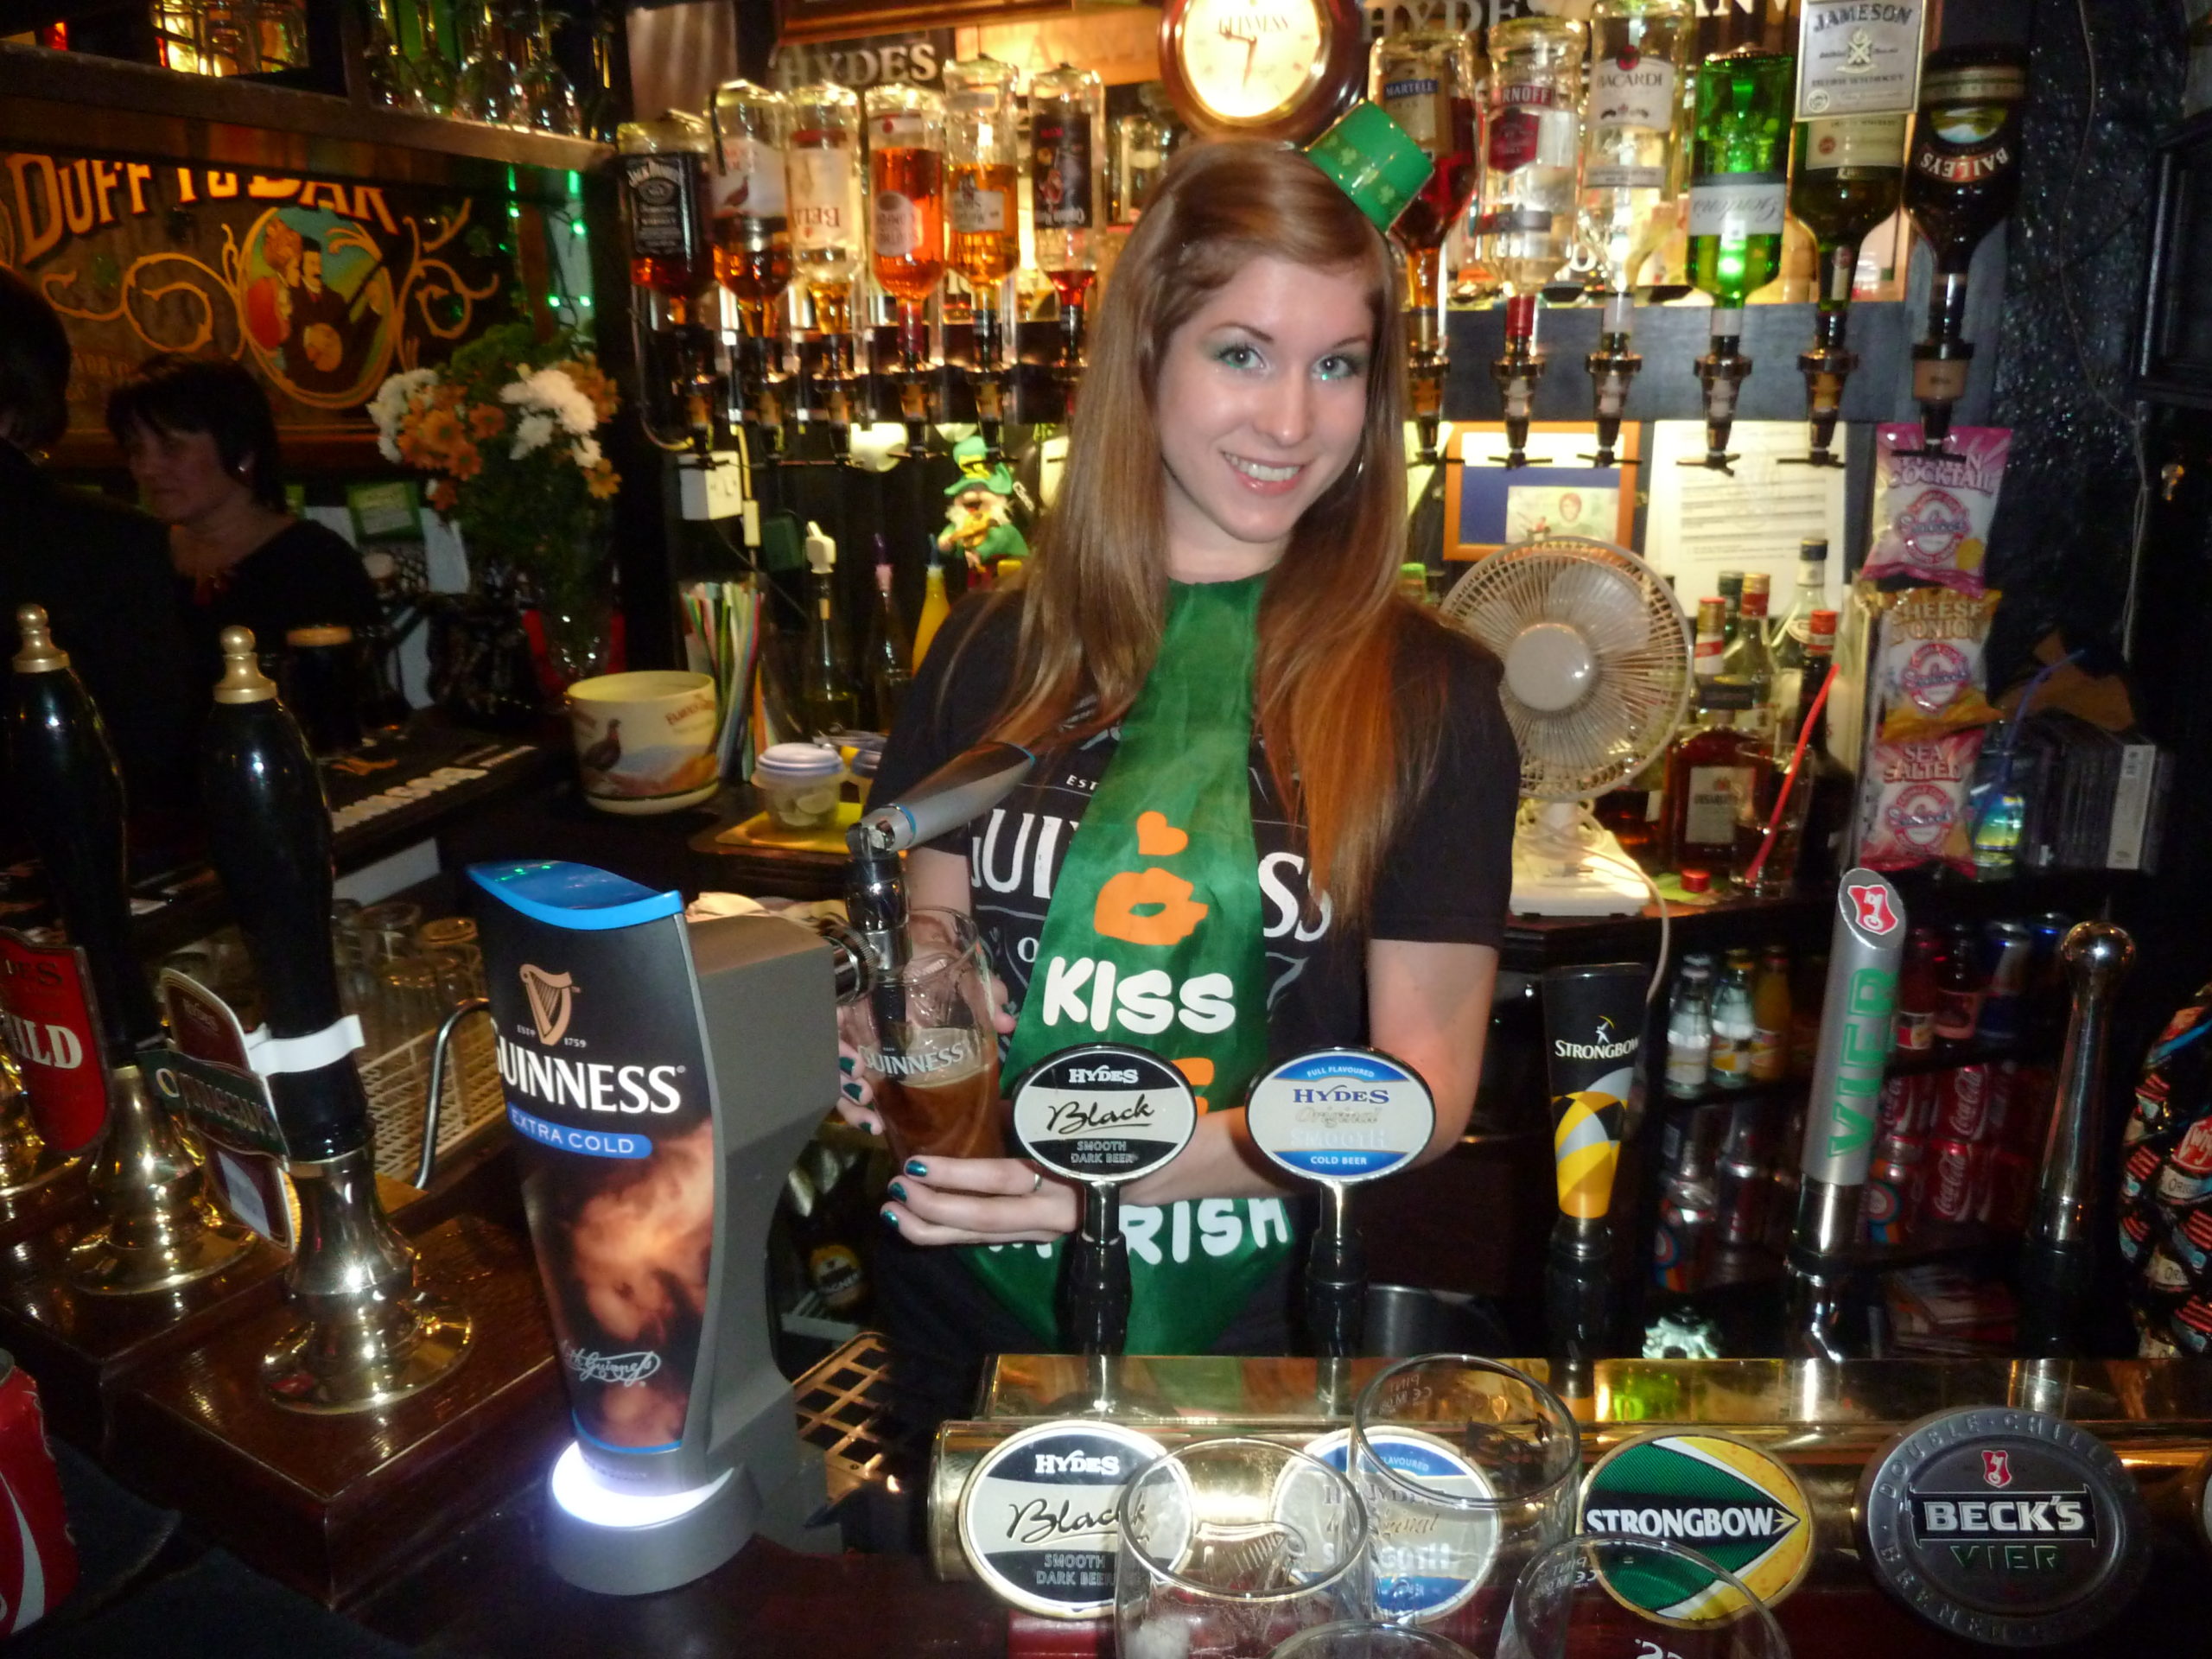 Working the St. Paddy's Day shift at the Grey Horse